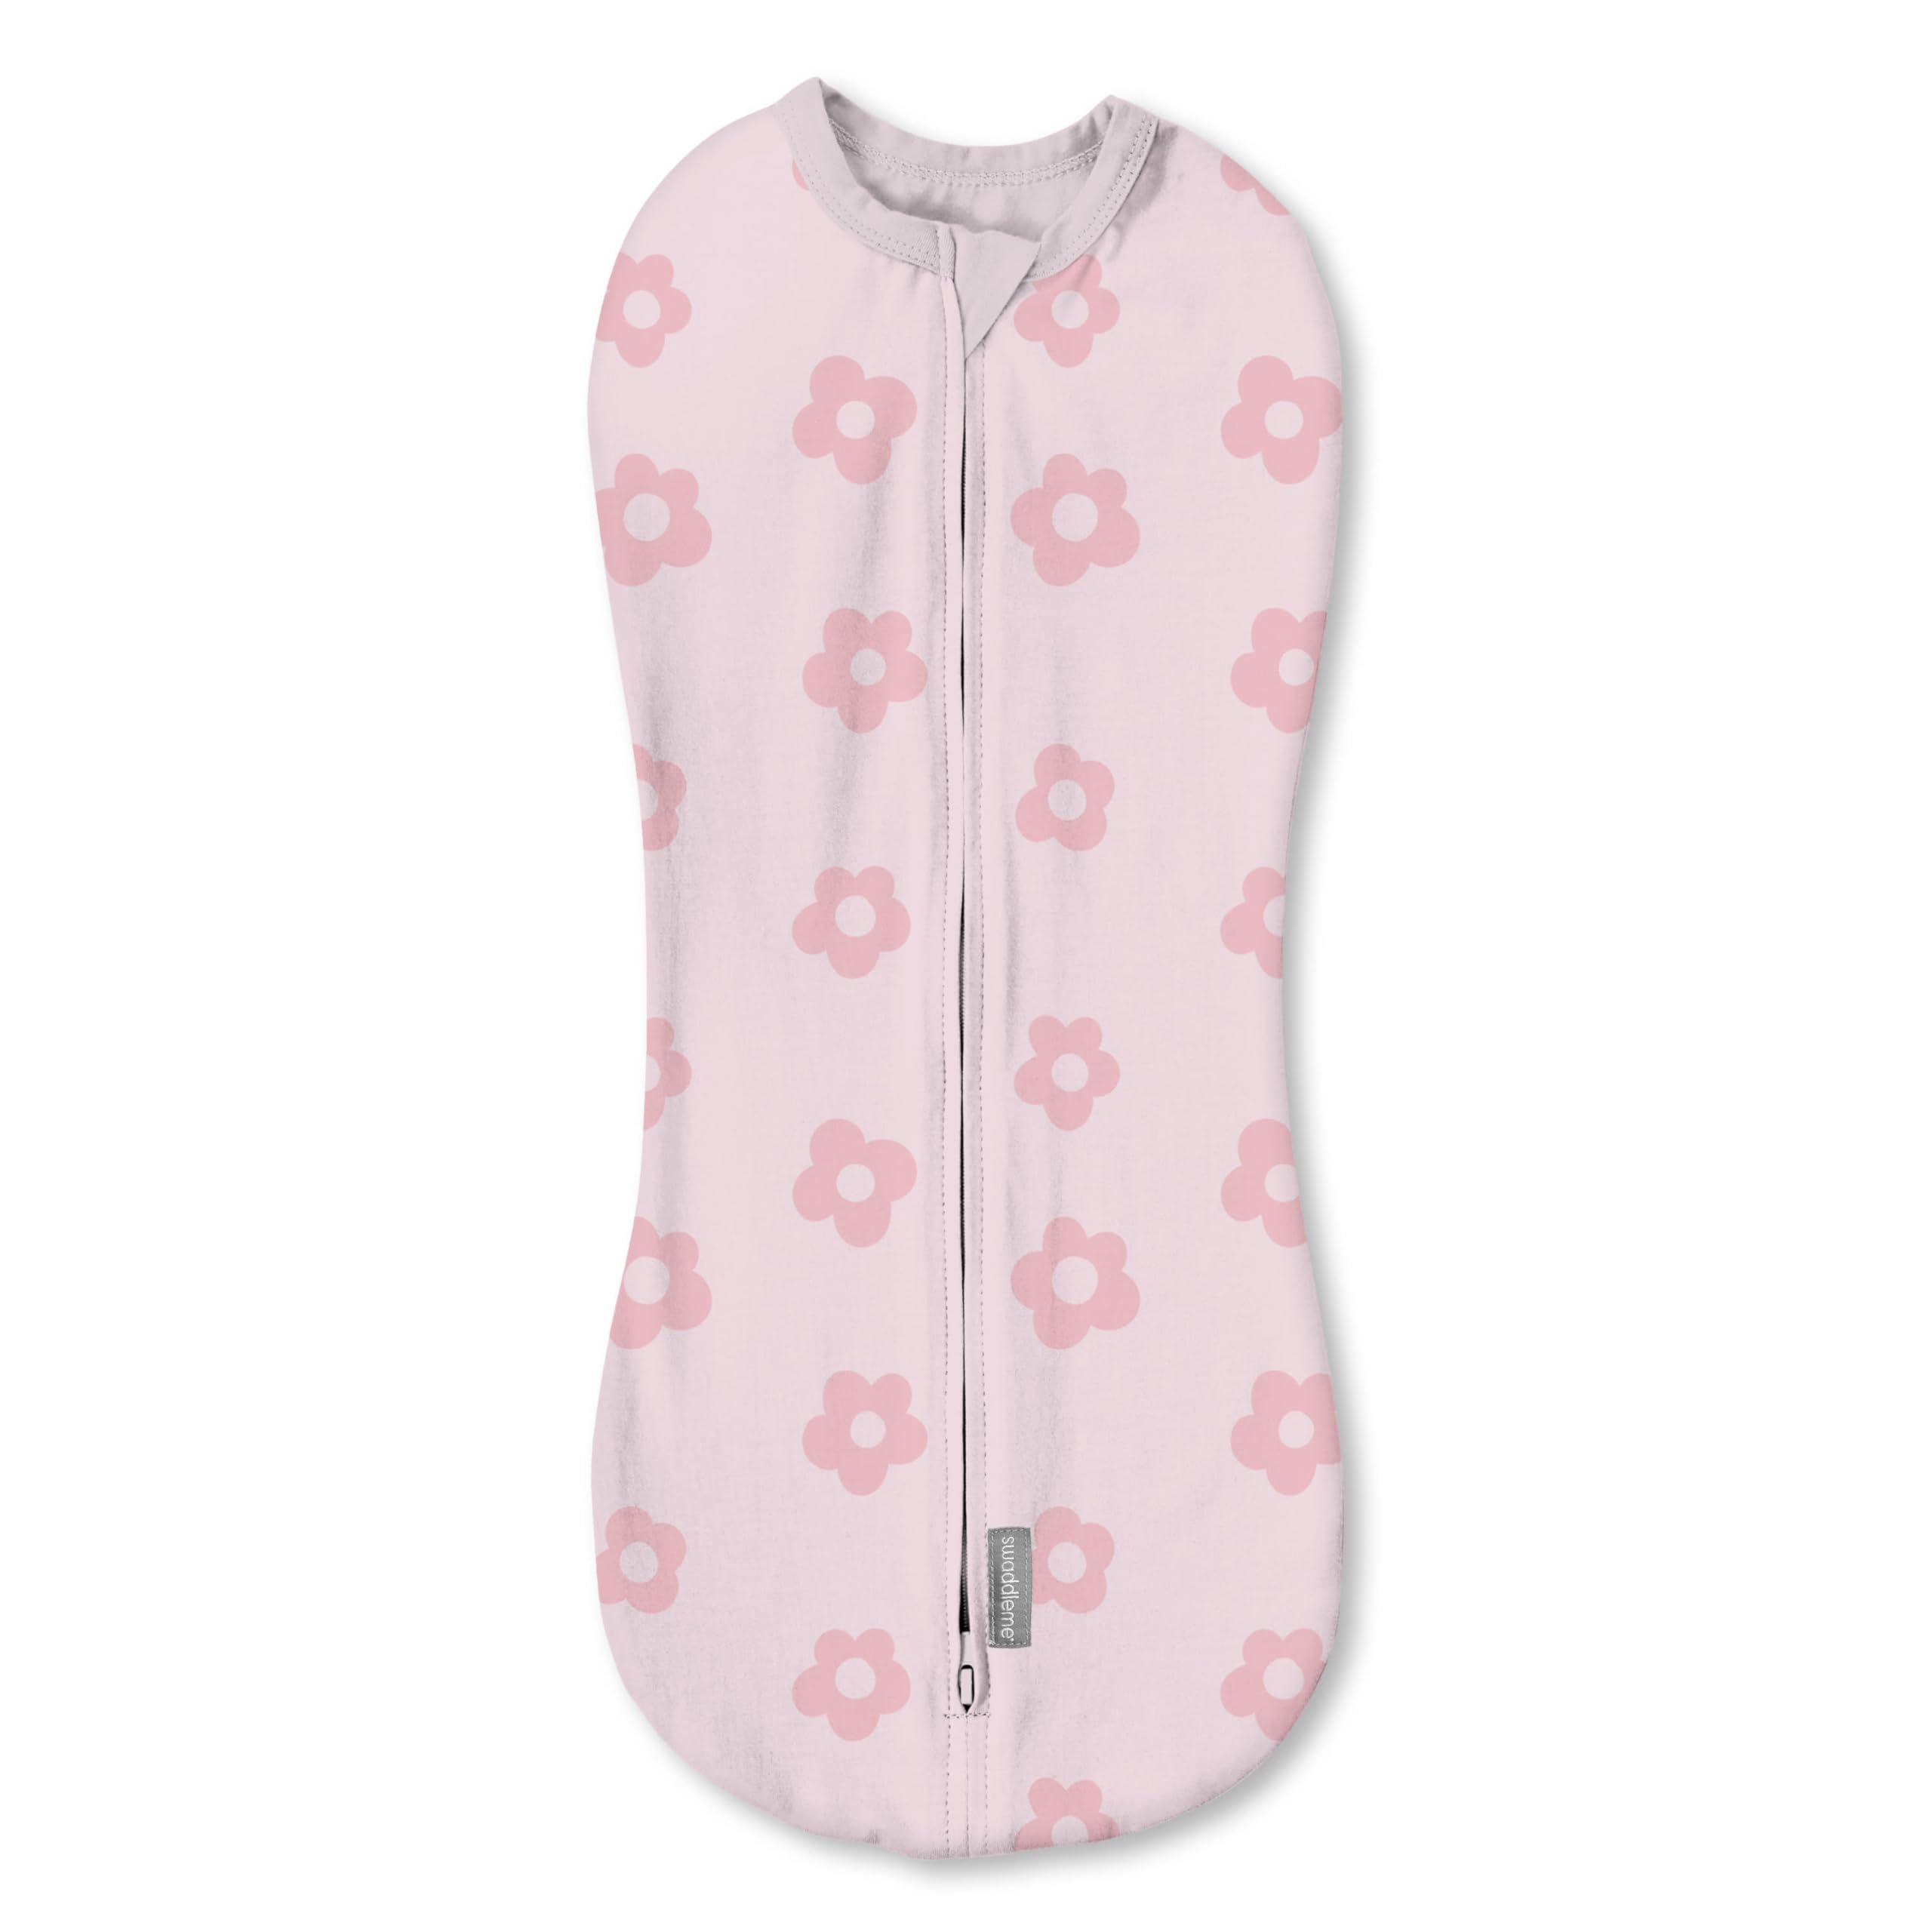 SwaddleMe by Ingenuity Pod, 0-2 Months, 1-Pack - Flower Confetti